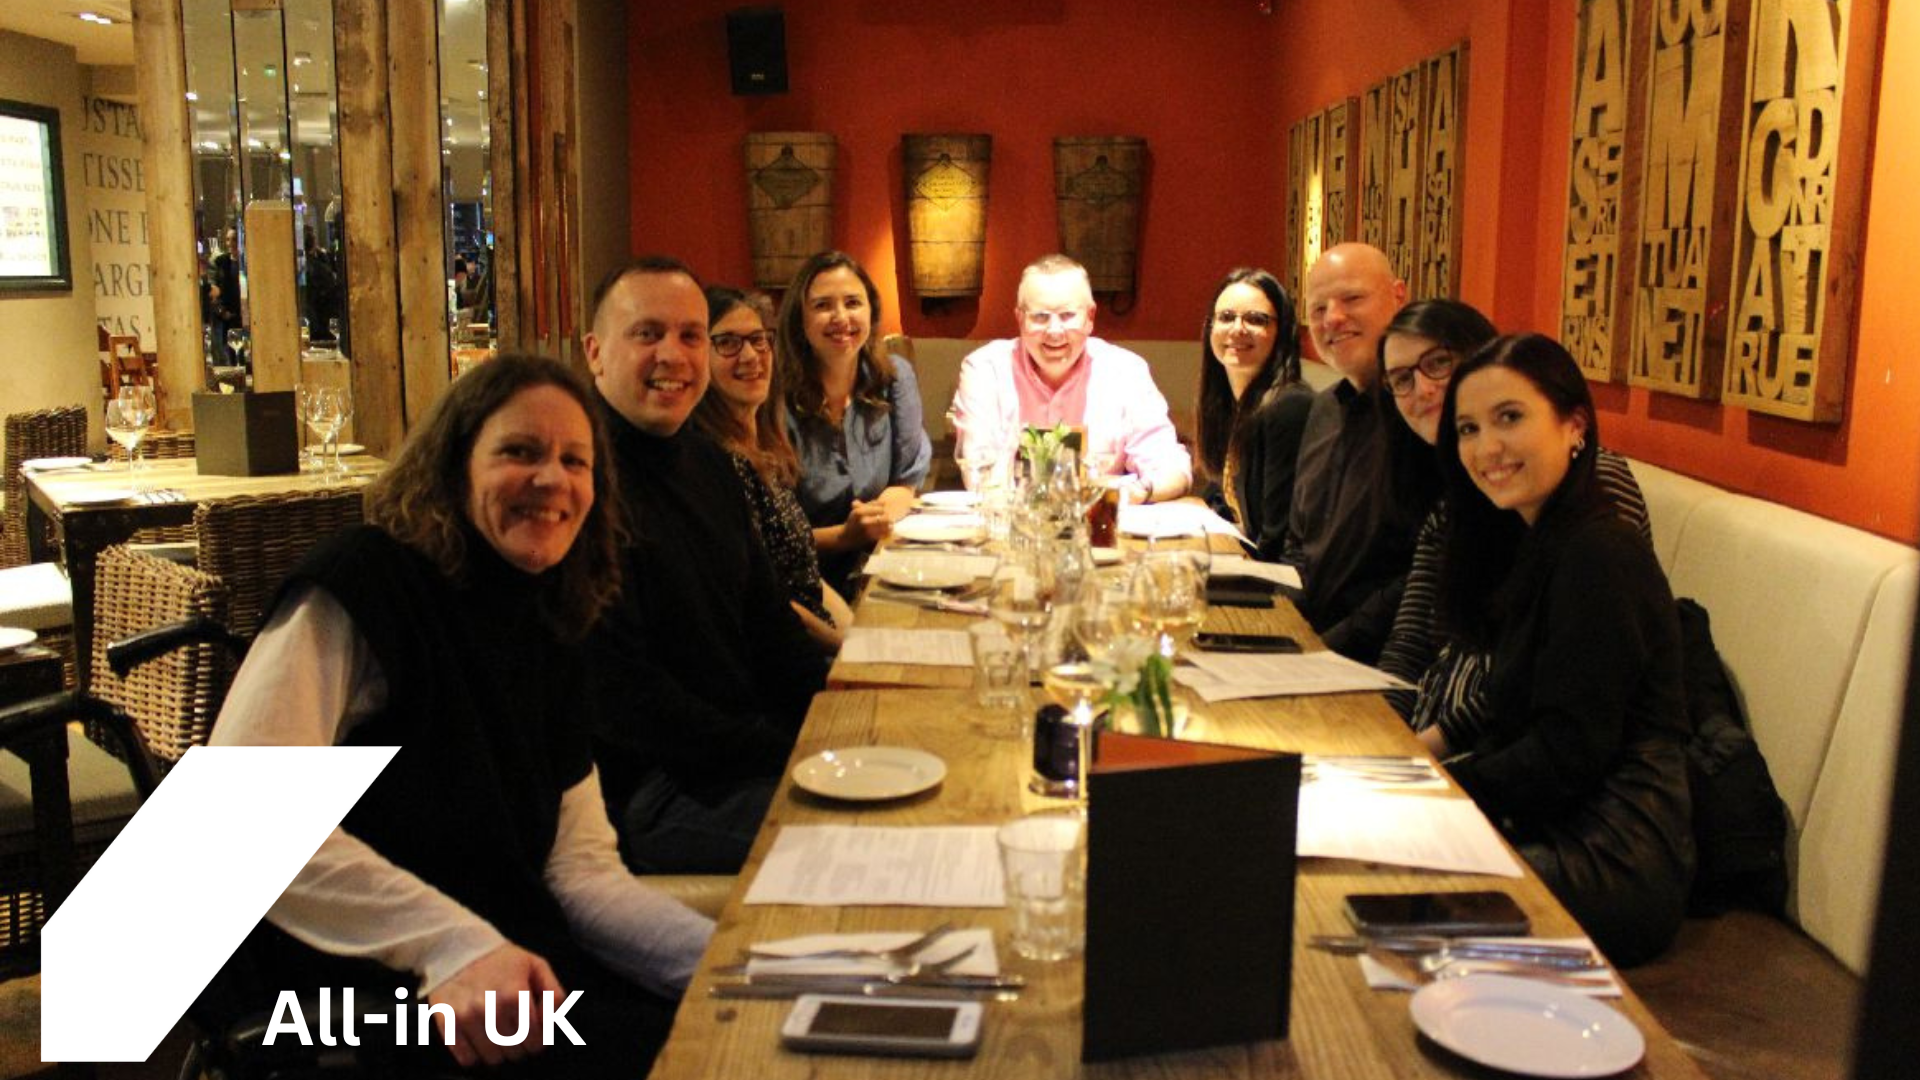 Group photo of Inclusion group: the RX All-in UK team sat down at a restaurant